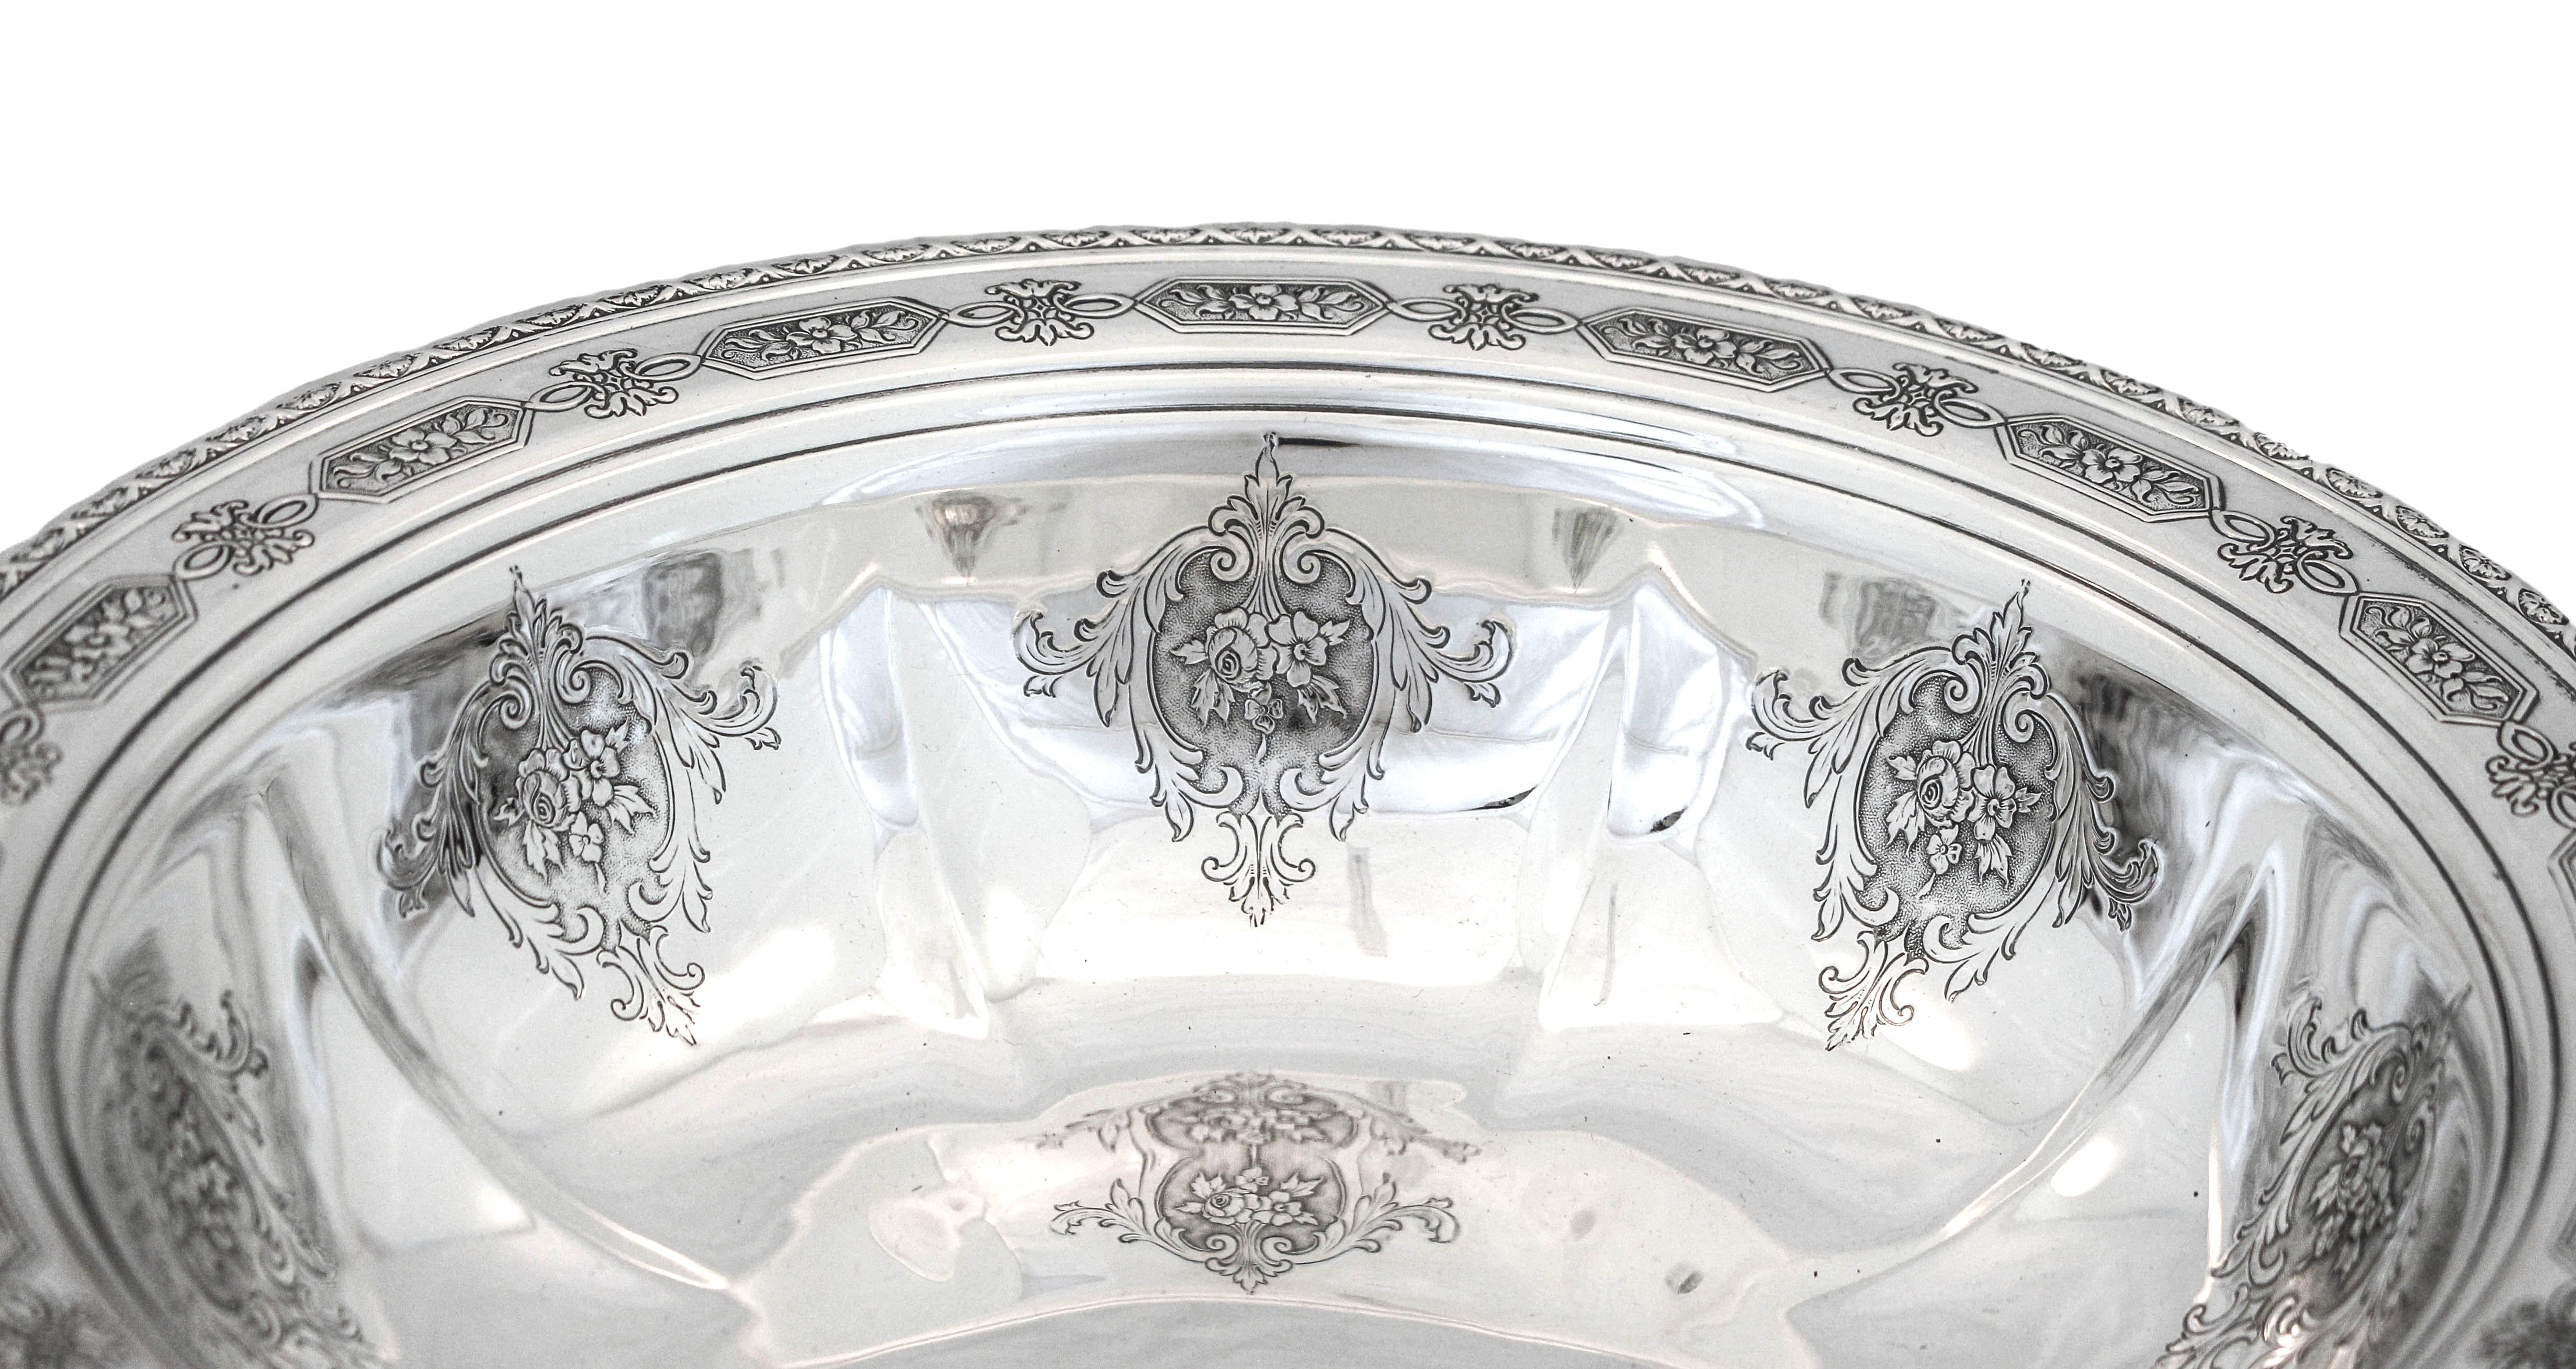 Being offered is a sterling silver bowl in the “Louis XIV” pattern by Towle Silversmiths. It has old-world charm and elegance. Around the border there is a symmetrical design with flowers. Inside the bowl around the edge, eight floral medallions